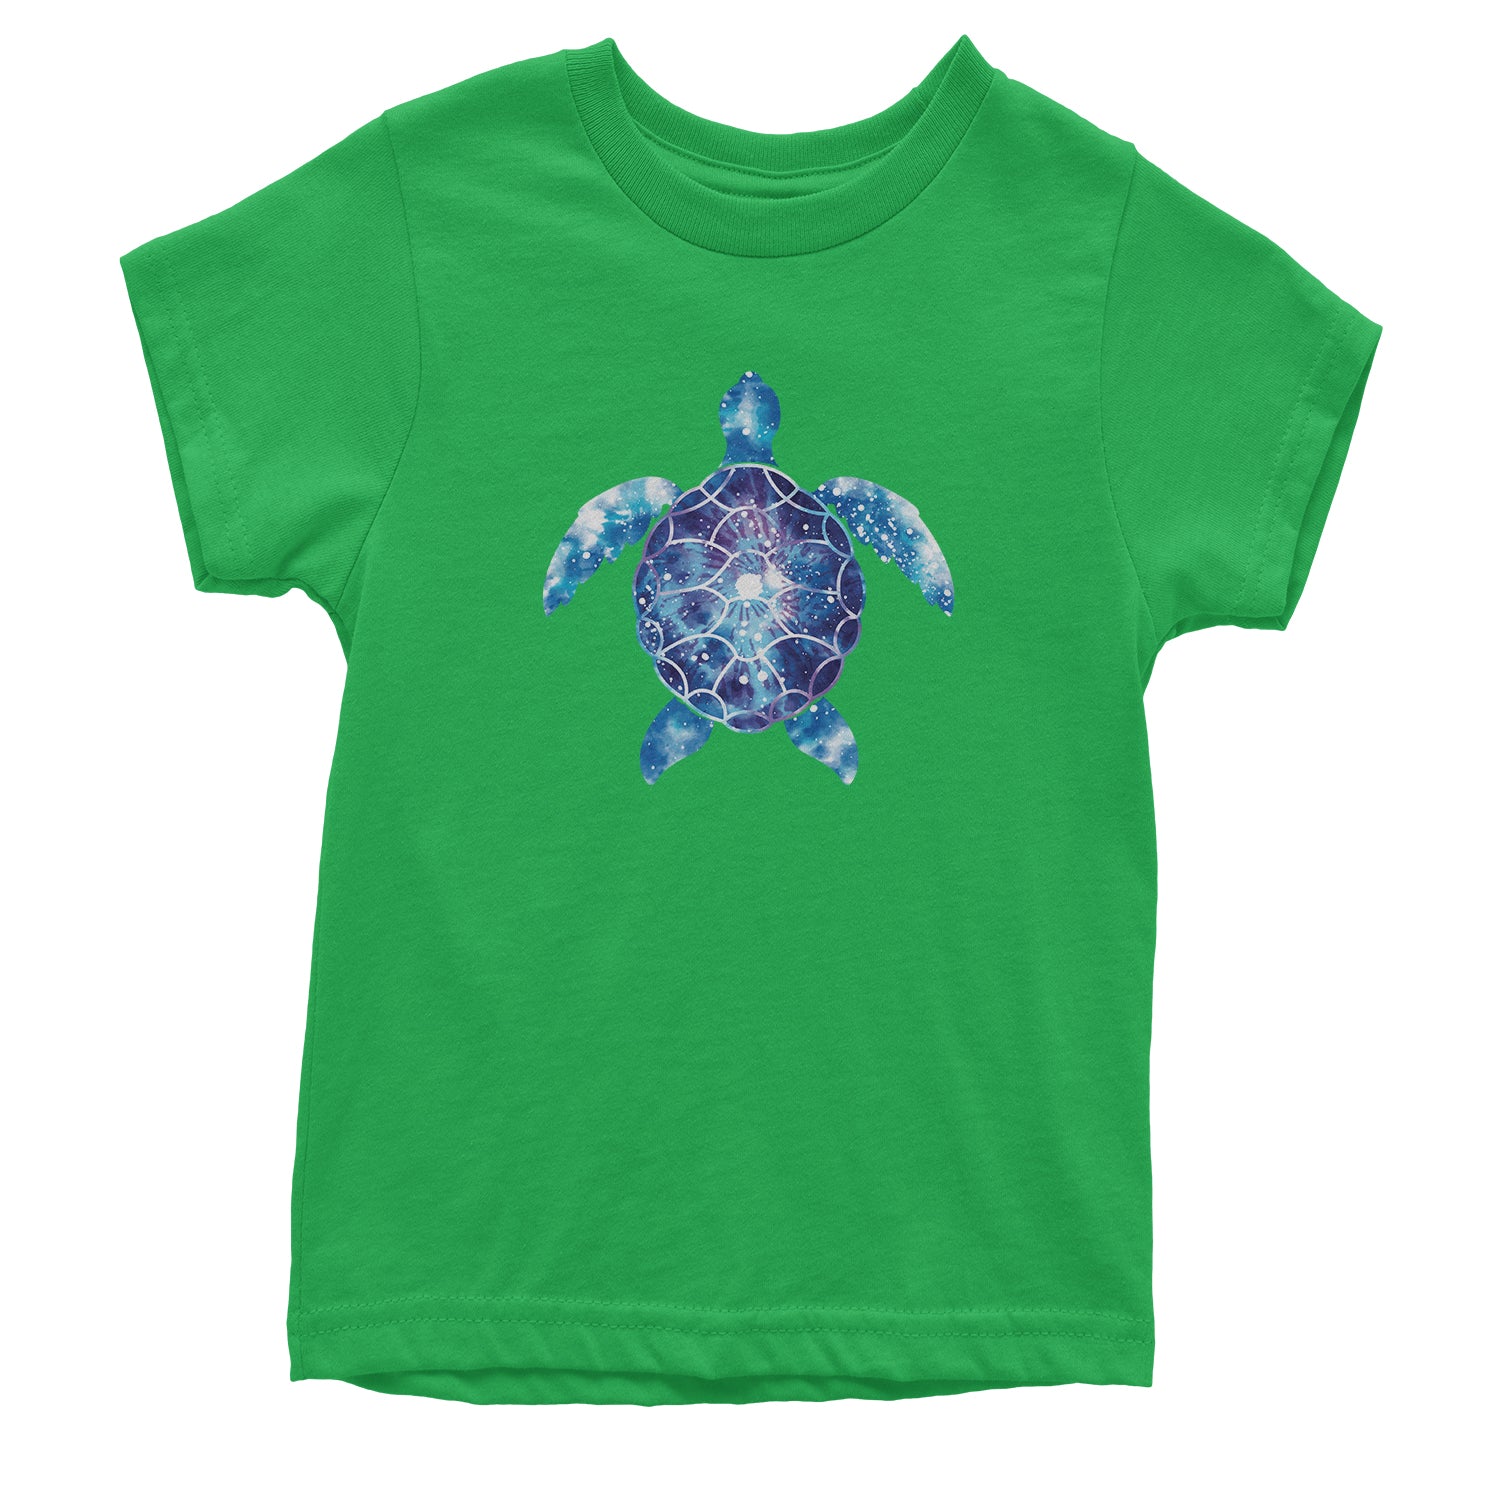 Tie Dye Sea Turtle Youth T-shirt eco, friendly, life, ocean, turtle by Expression Tees